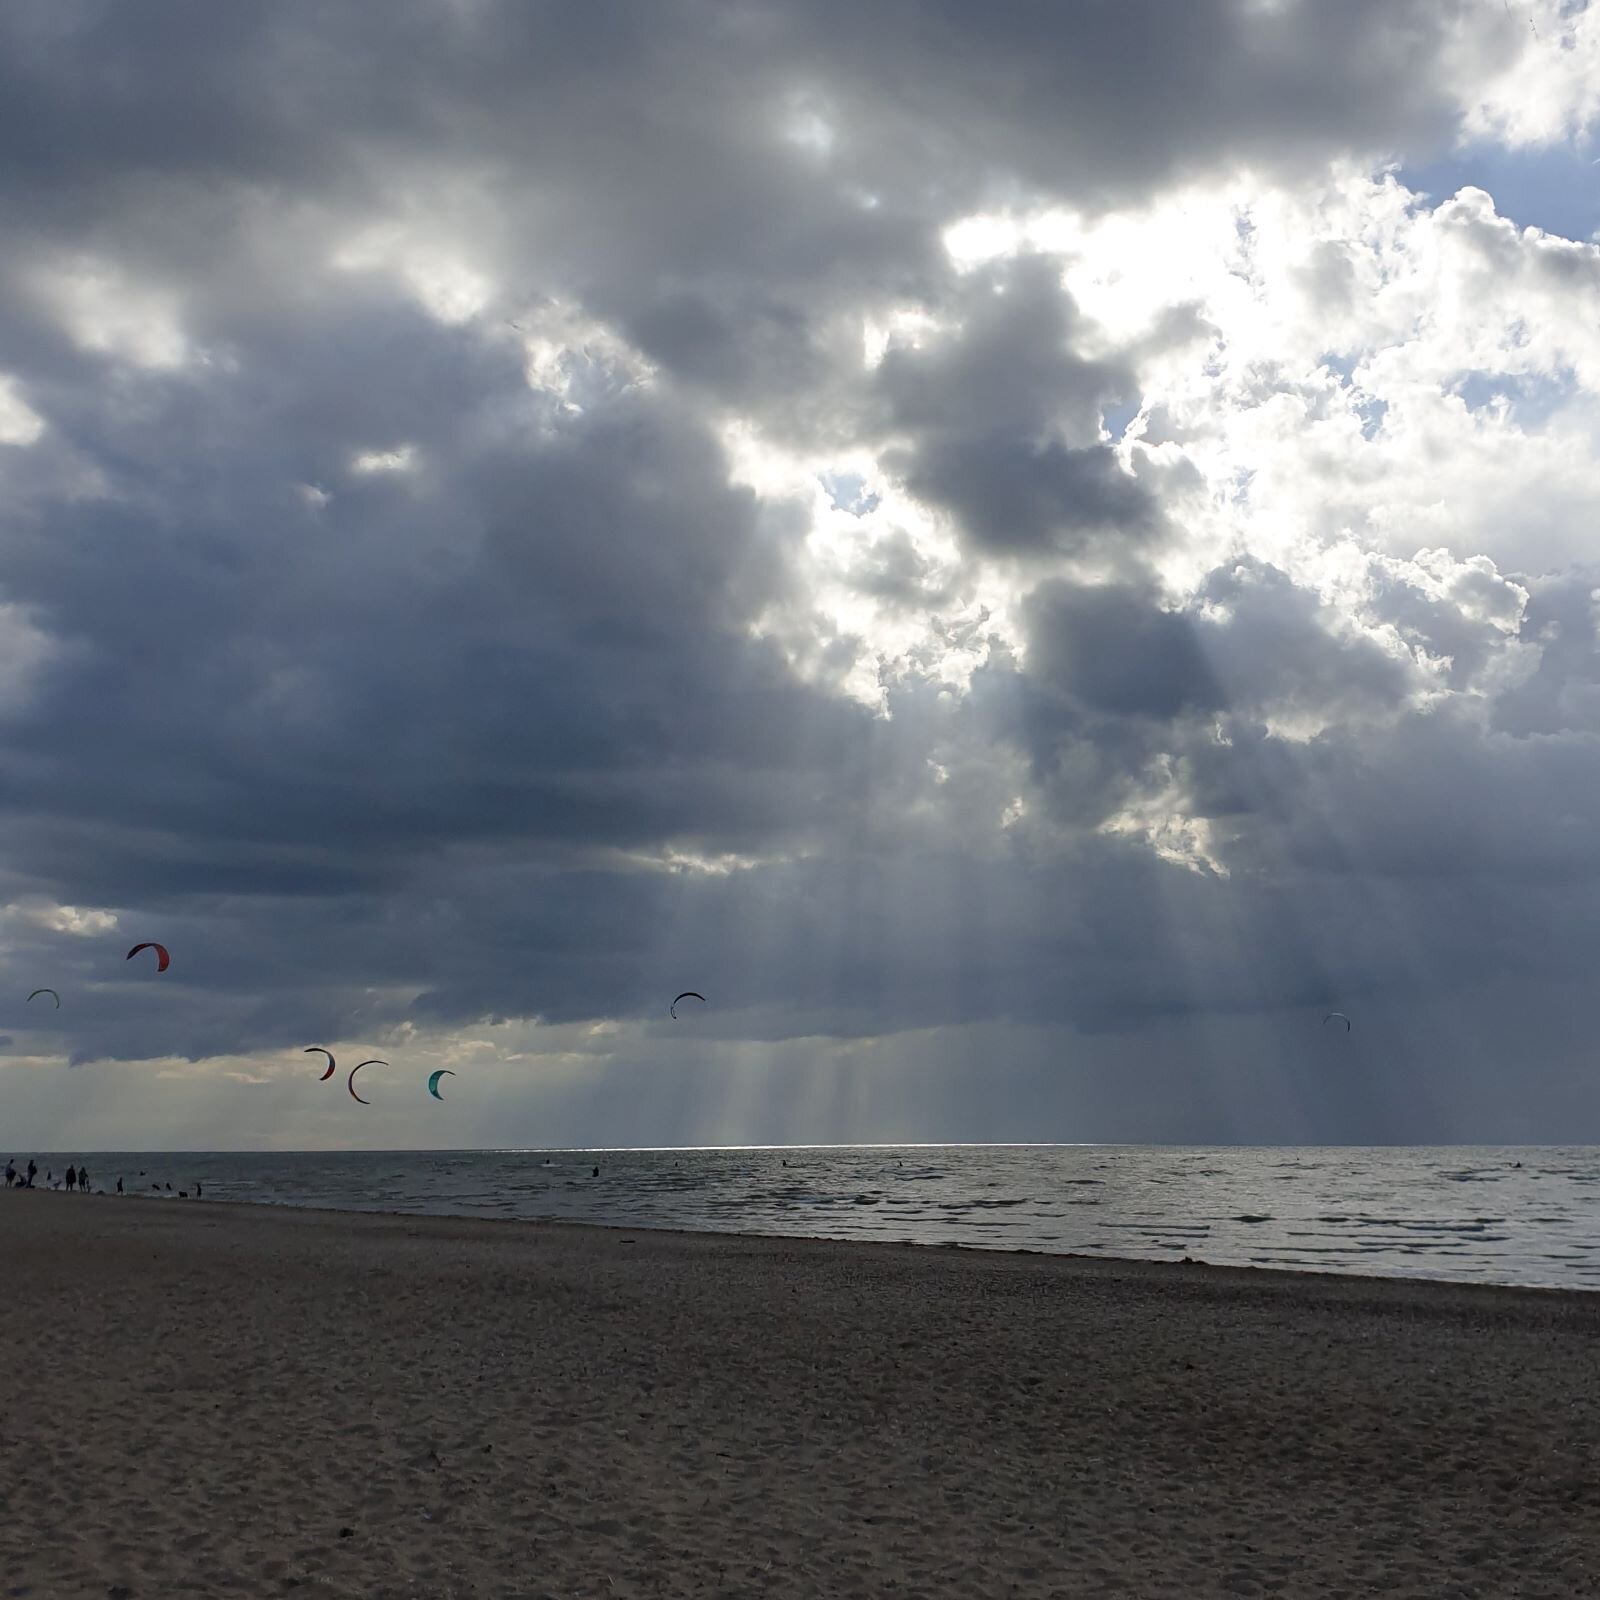 rays of sun breaking through grey clouds over a beach with kite surfers